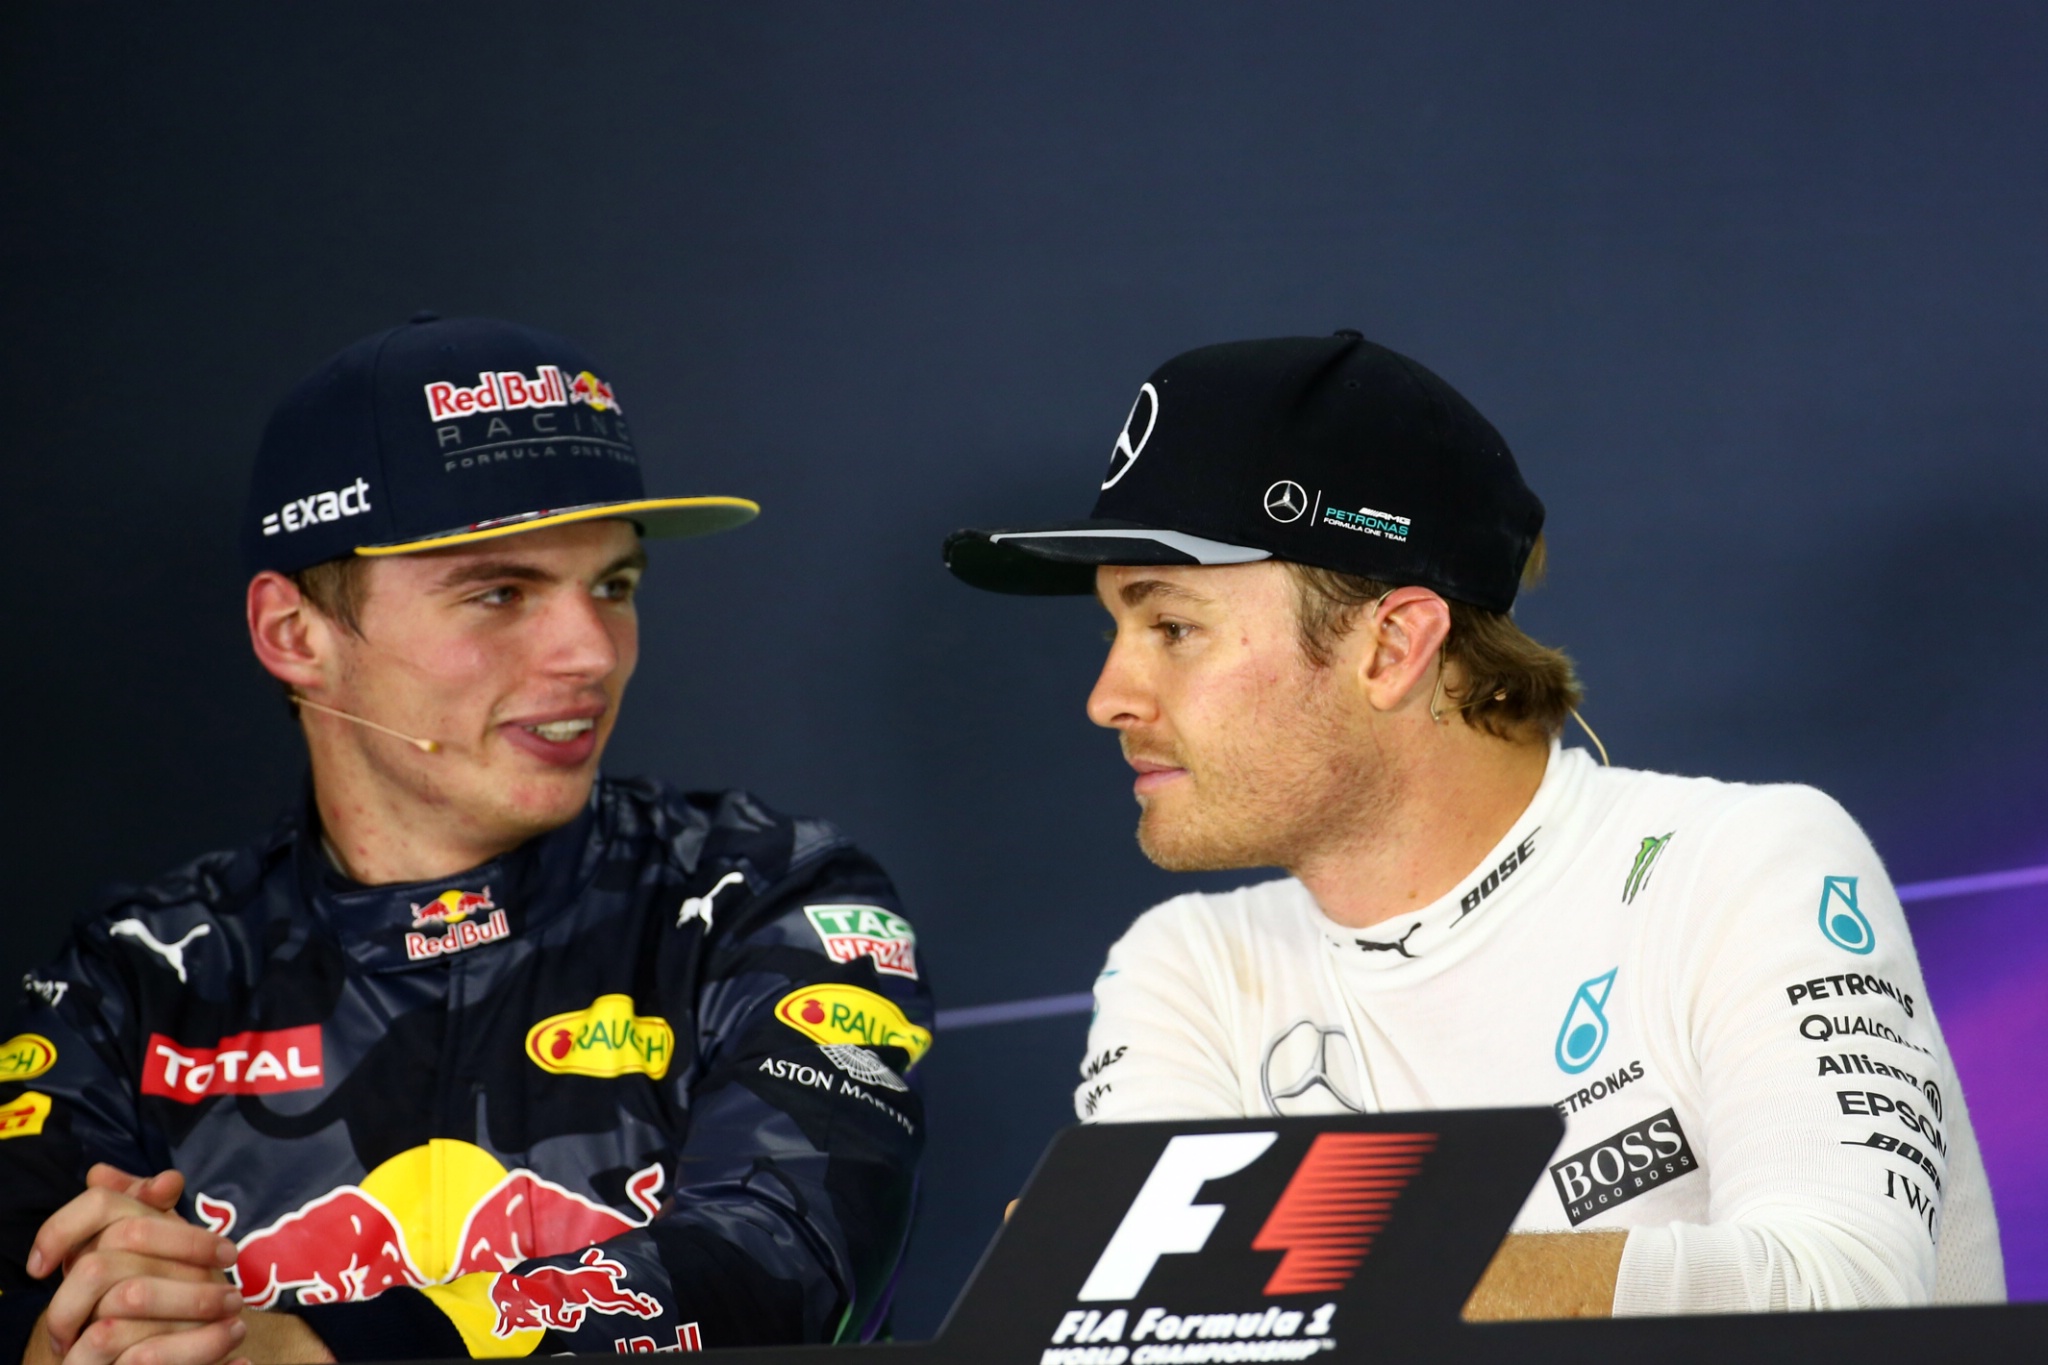  - Race, Press conference, Max Verstappen (NED) Red Bull Racing RB12 and Nico Rosberg (GER) Mercedes AMG F1 W07